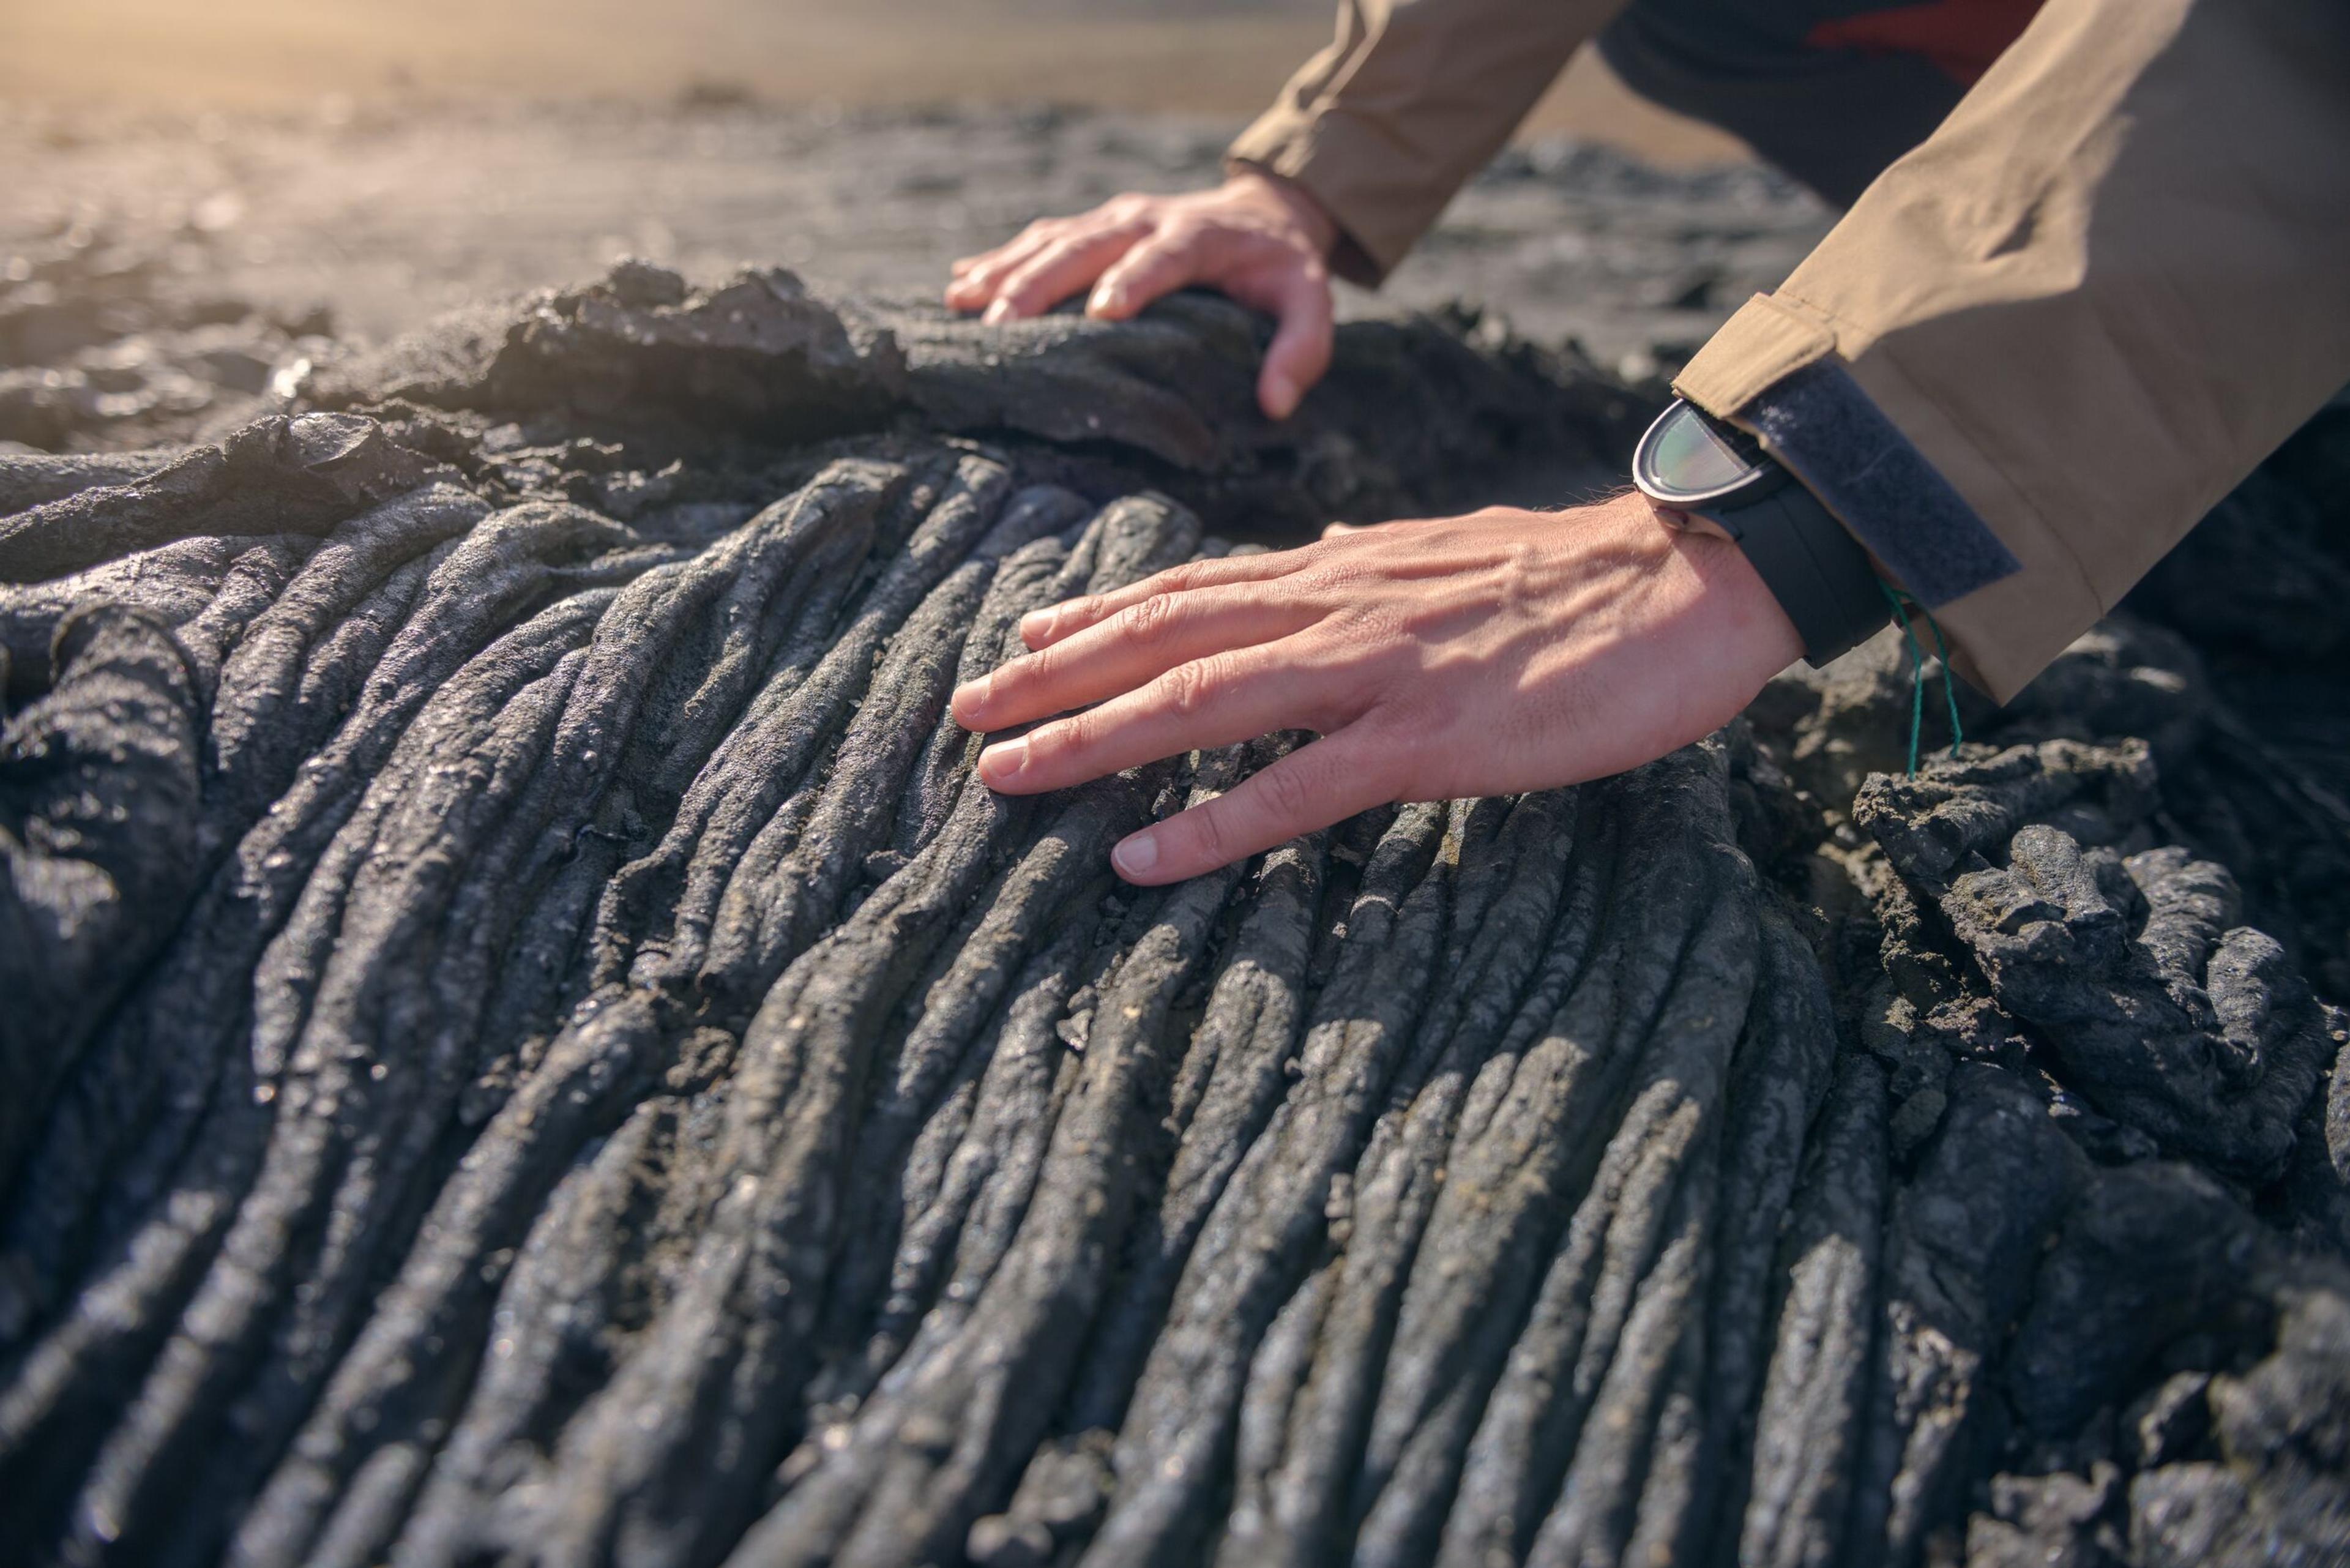 A hand gently touching the intricately patterned surface of freshly solidified lava, revealing its mesmerizing and captivating textures.